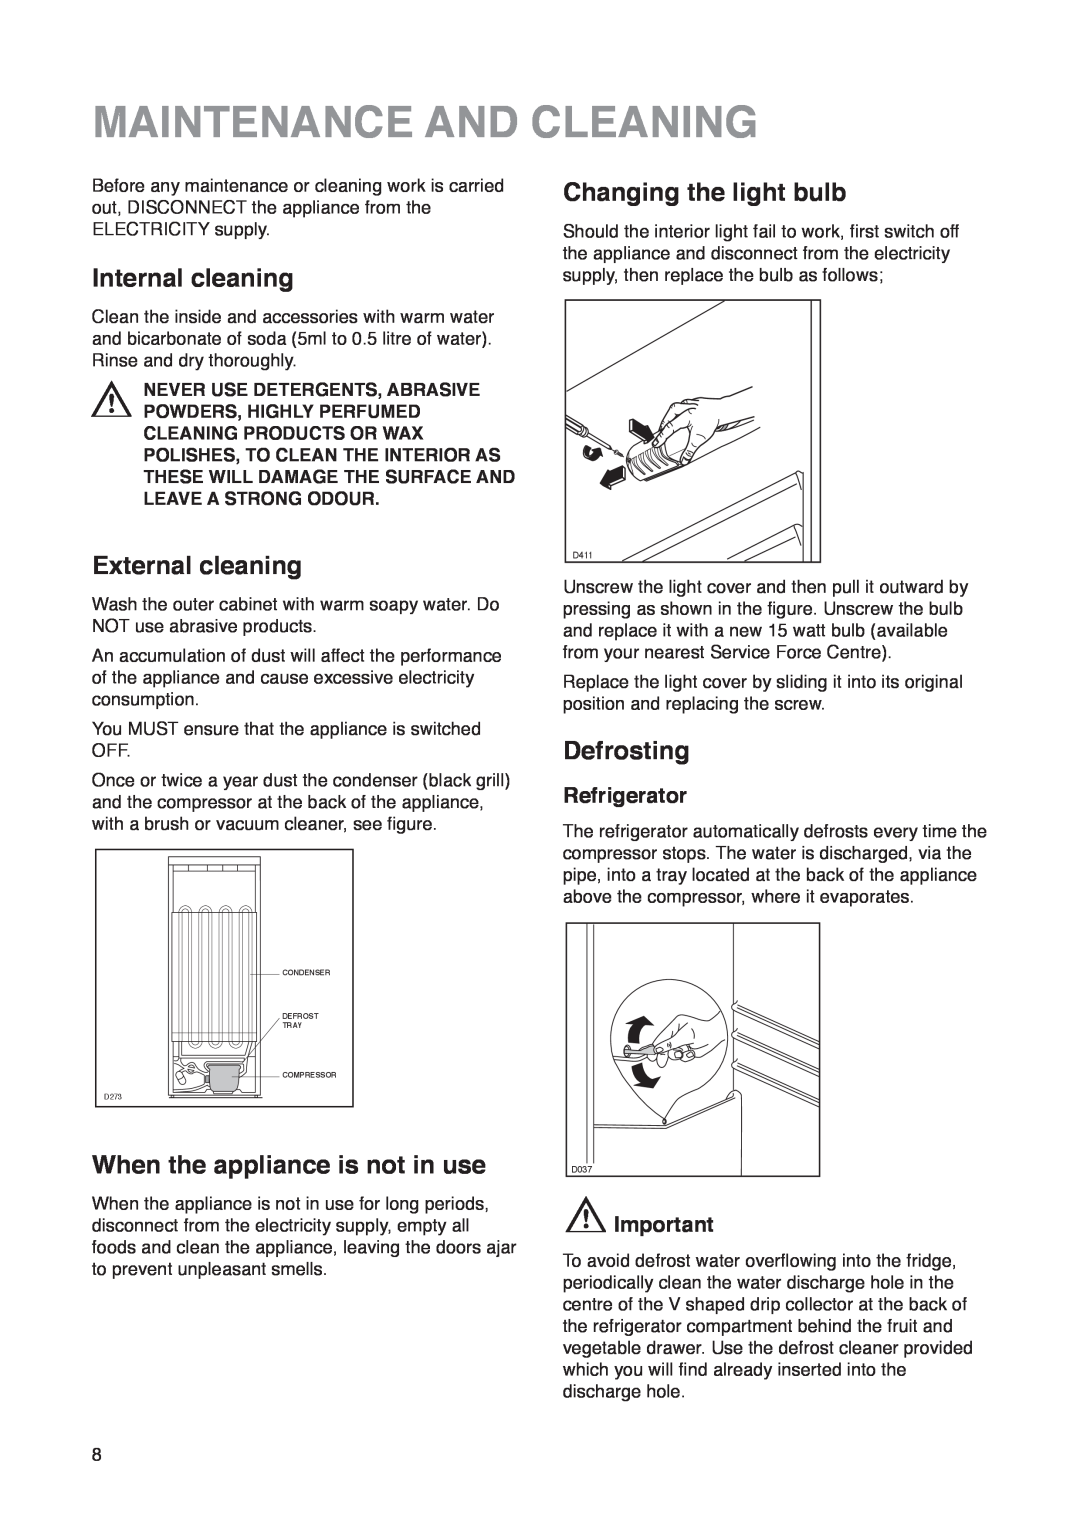 Zanussi ZK 53/37 R manual Maintenance And Cleaning, Internal cleaning, External cleaning, When the appliance is not in use 